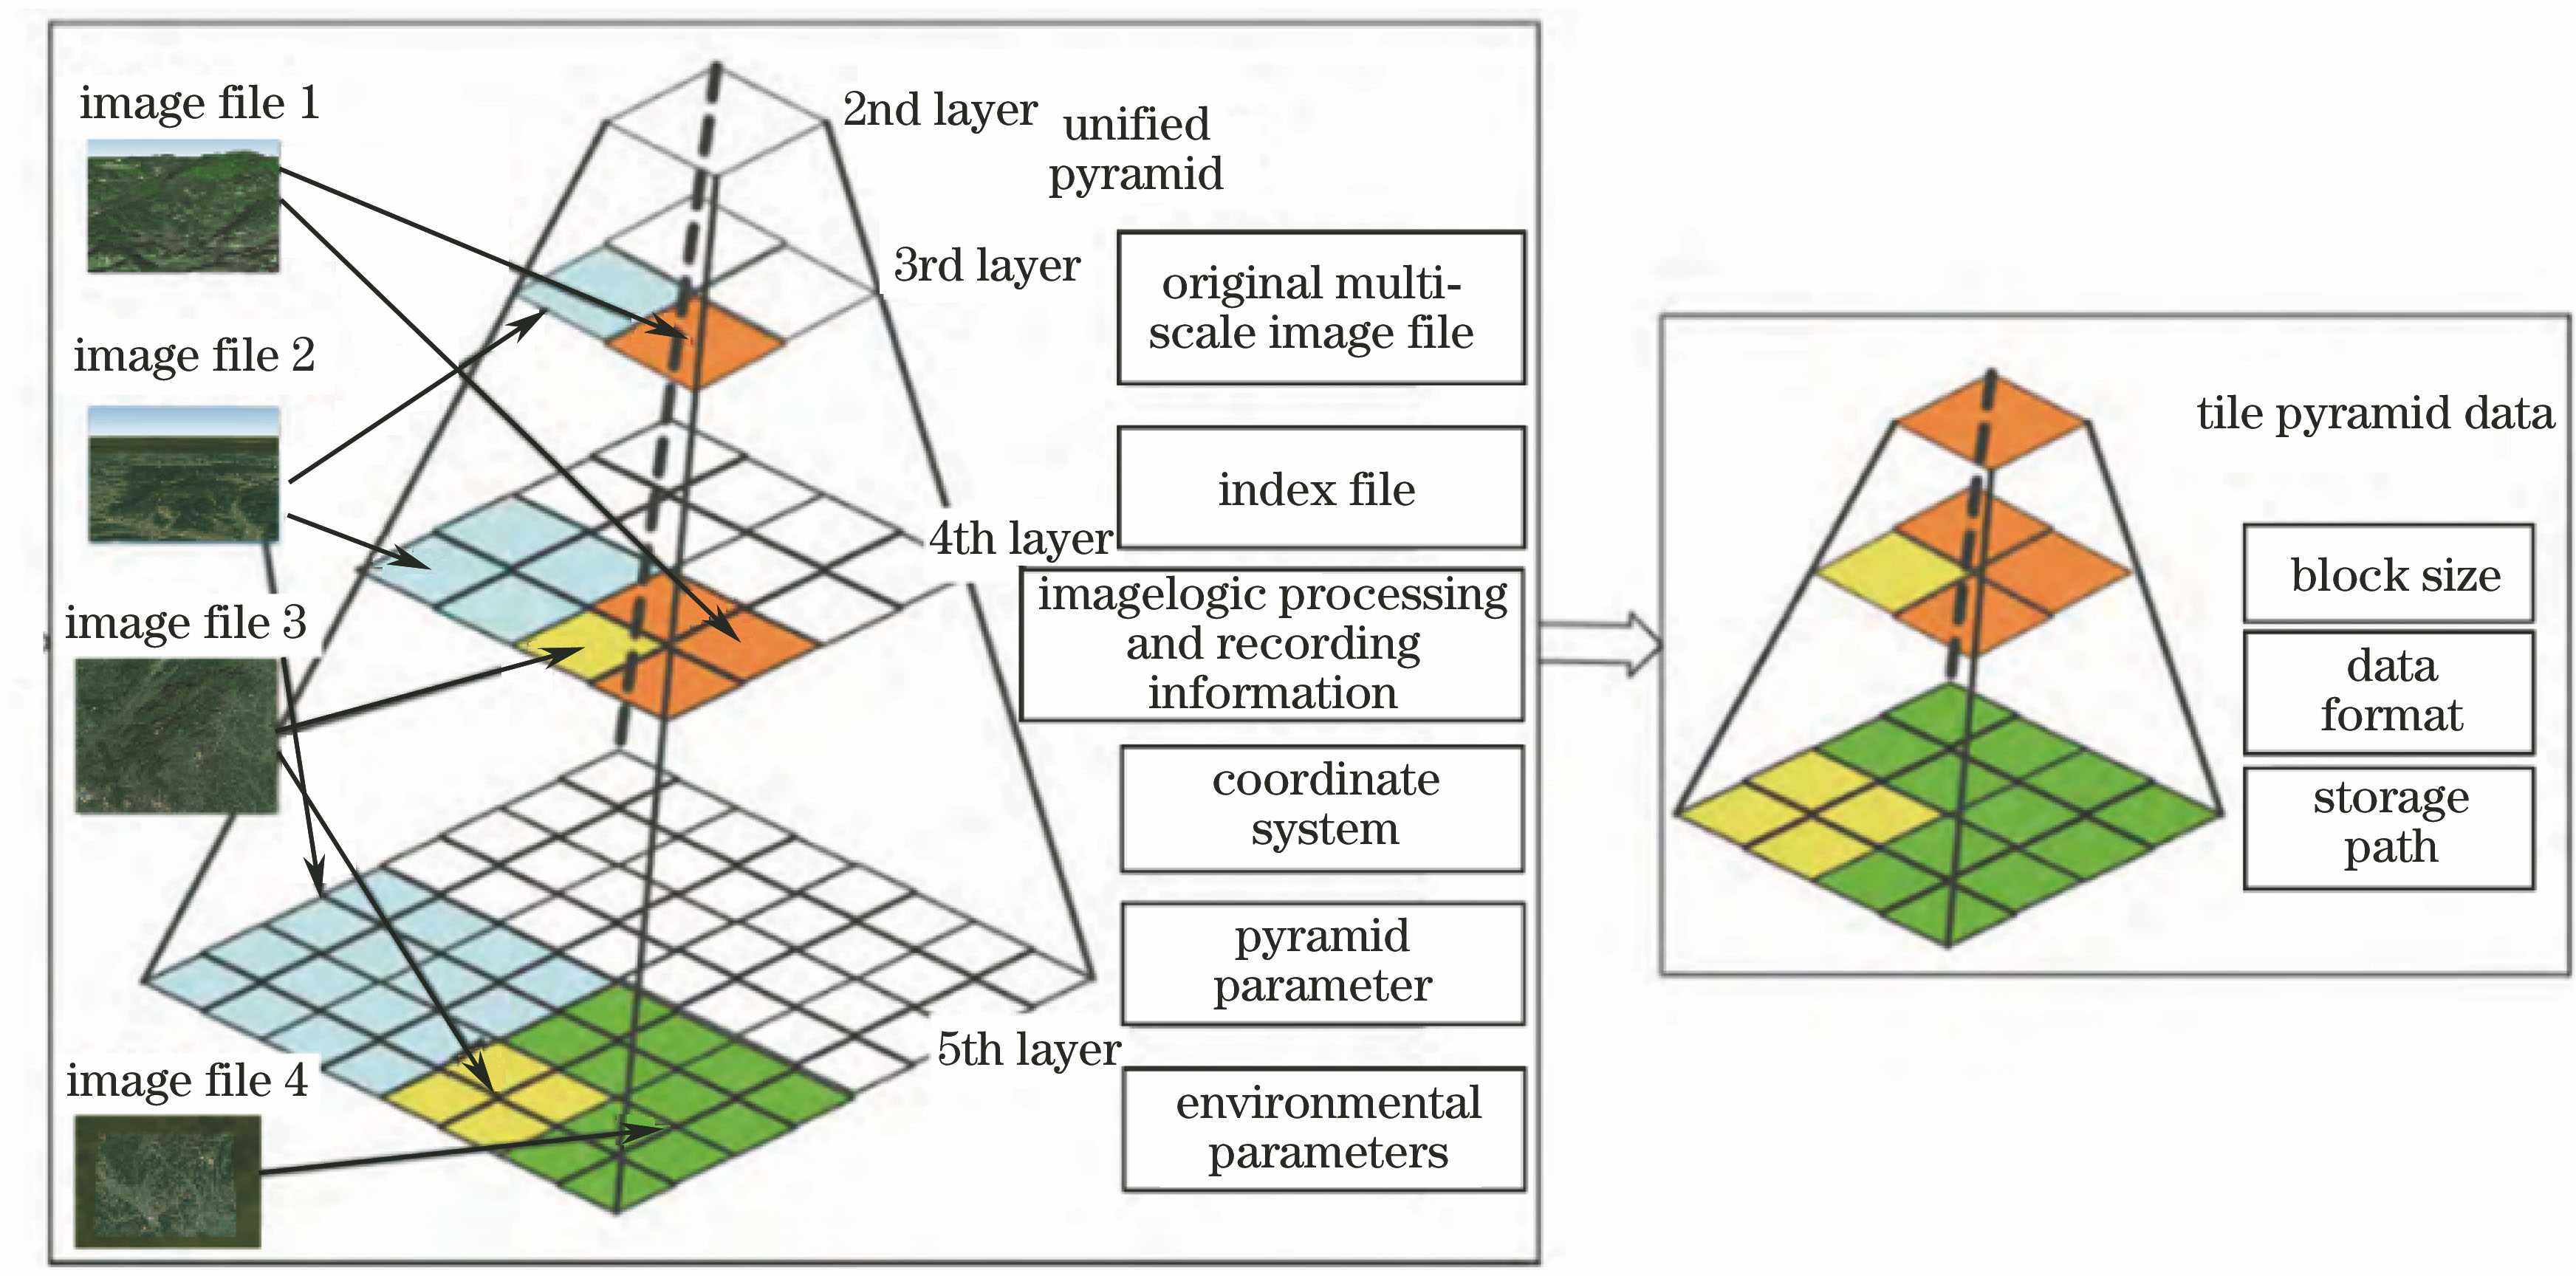 Structural diagram of pyramid model for multi-scale images